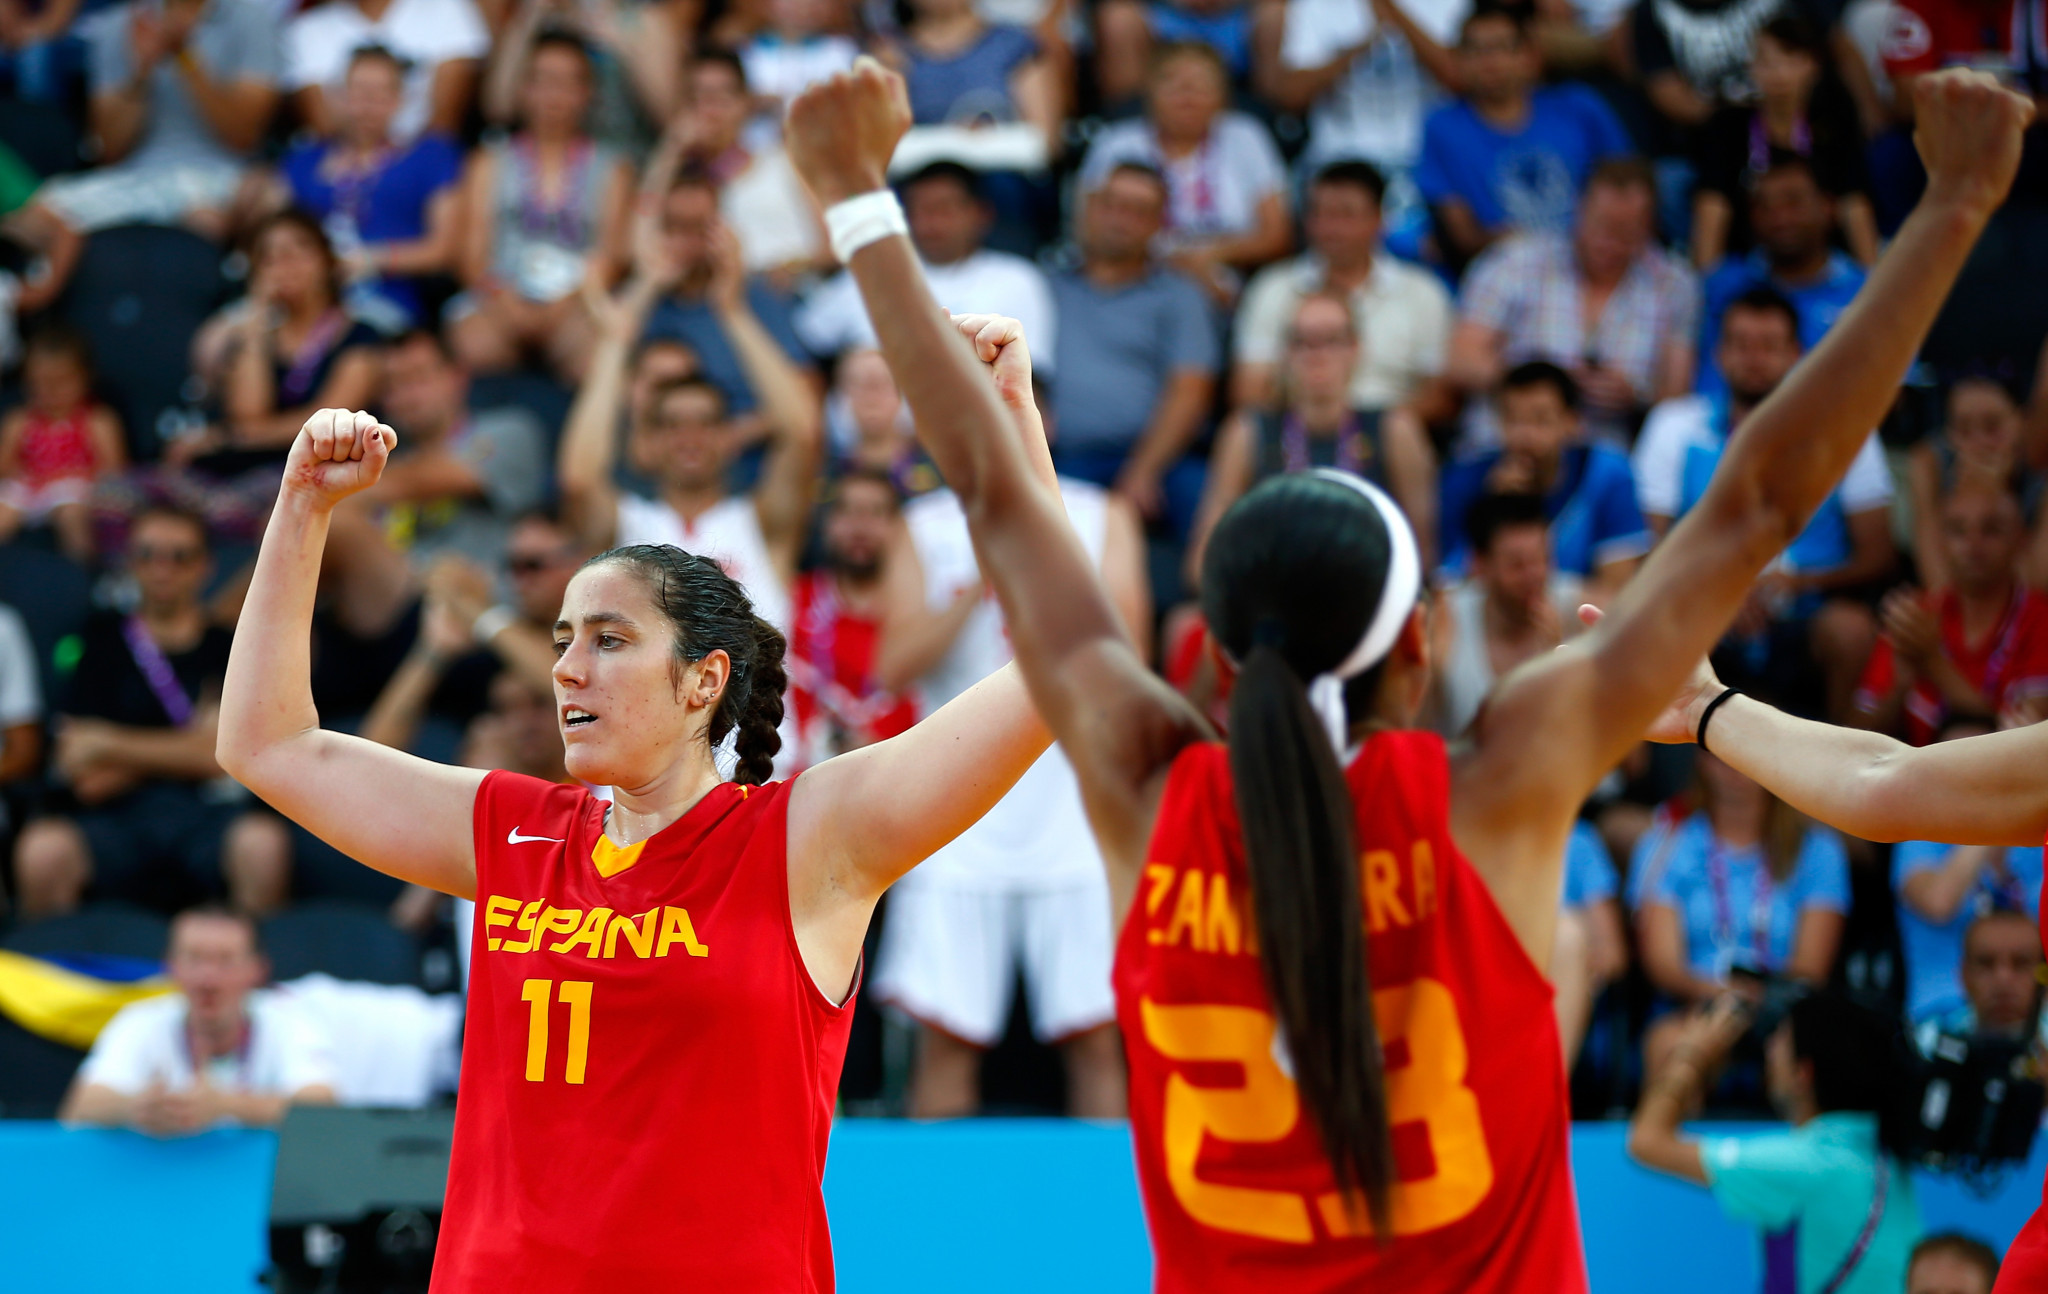 3x3 Women's Series to return with first event held at FIBA headquarters